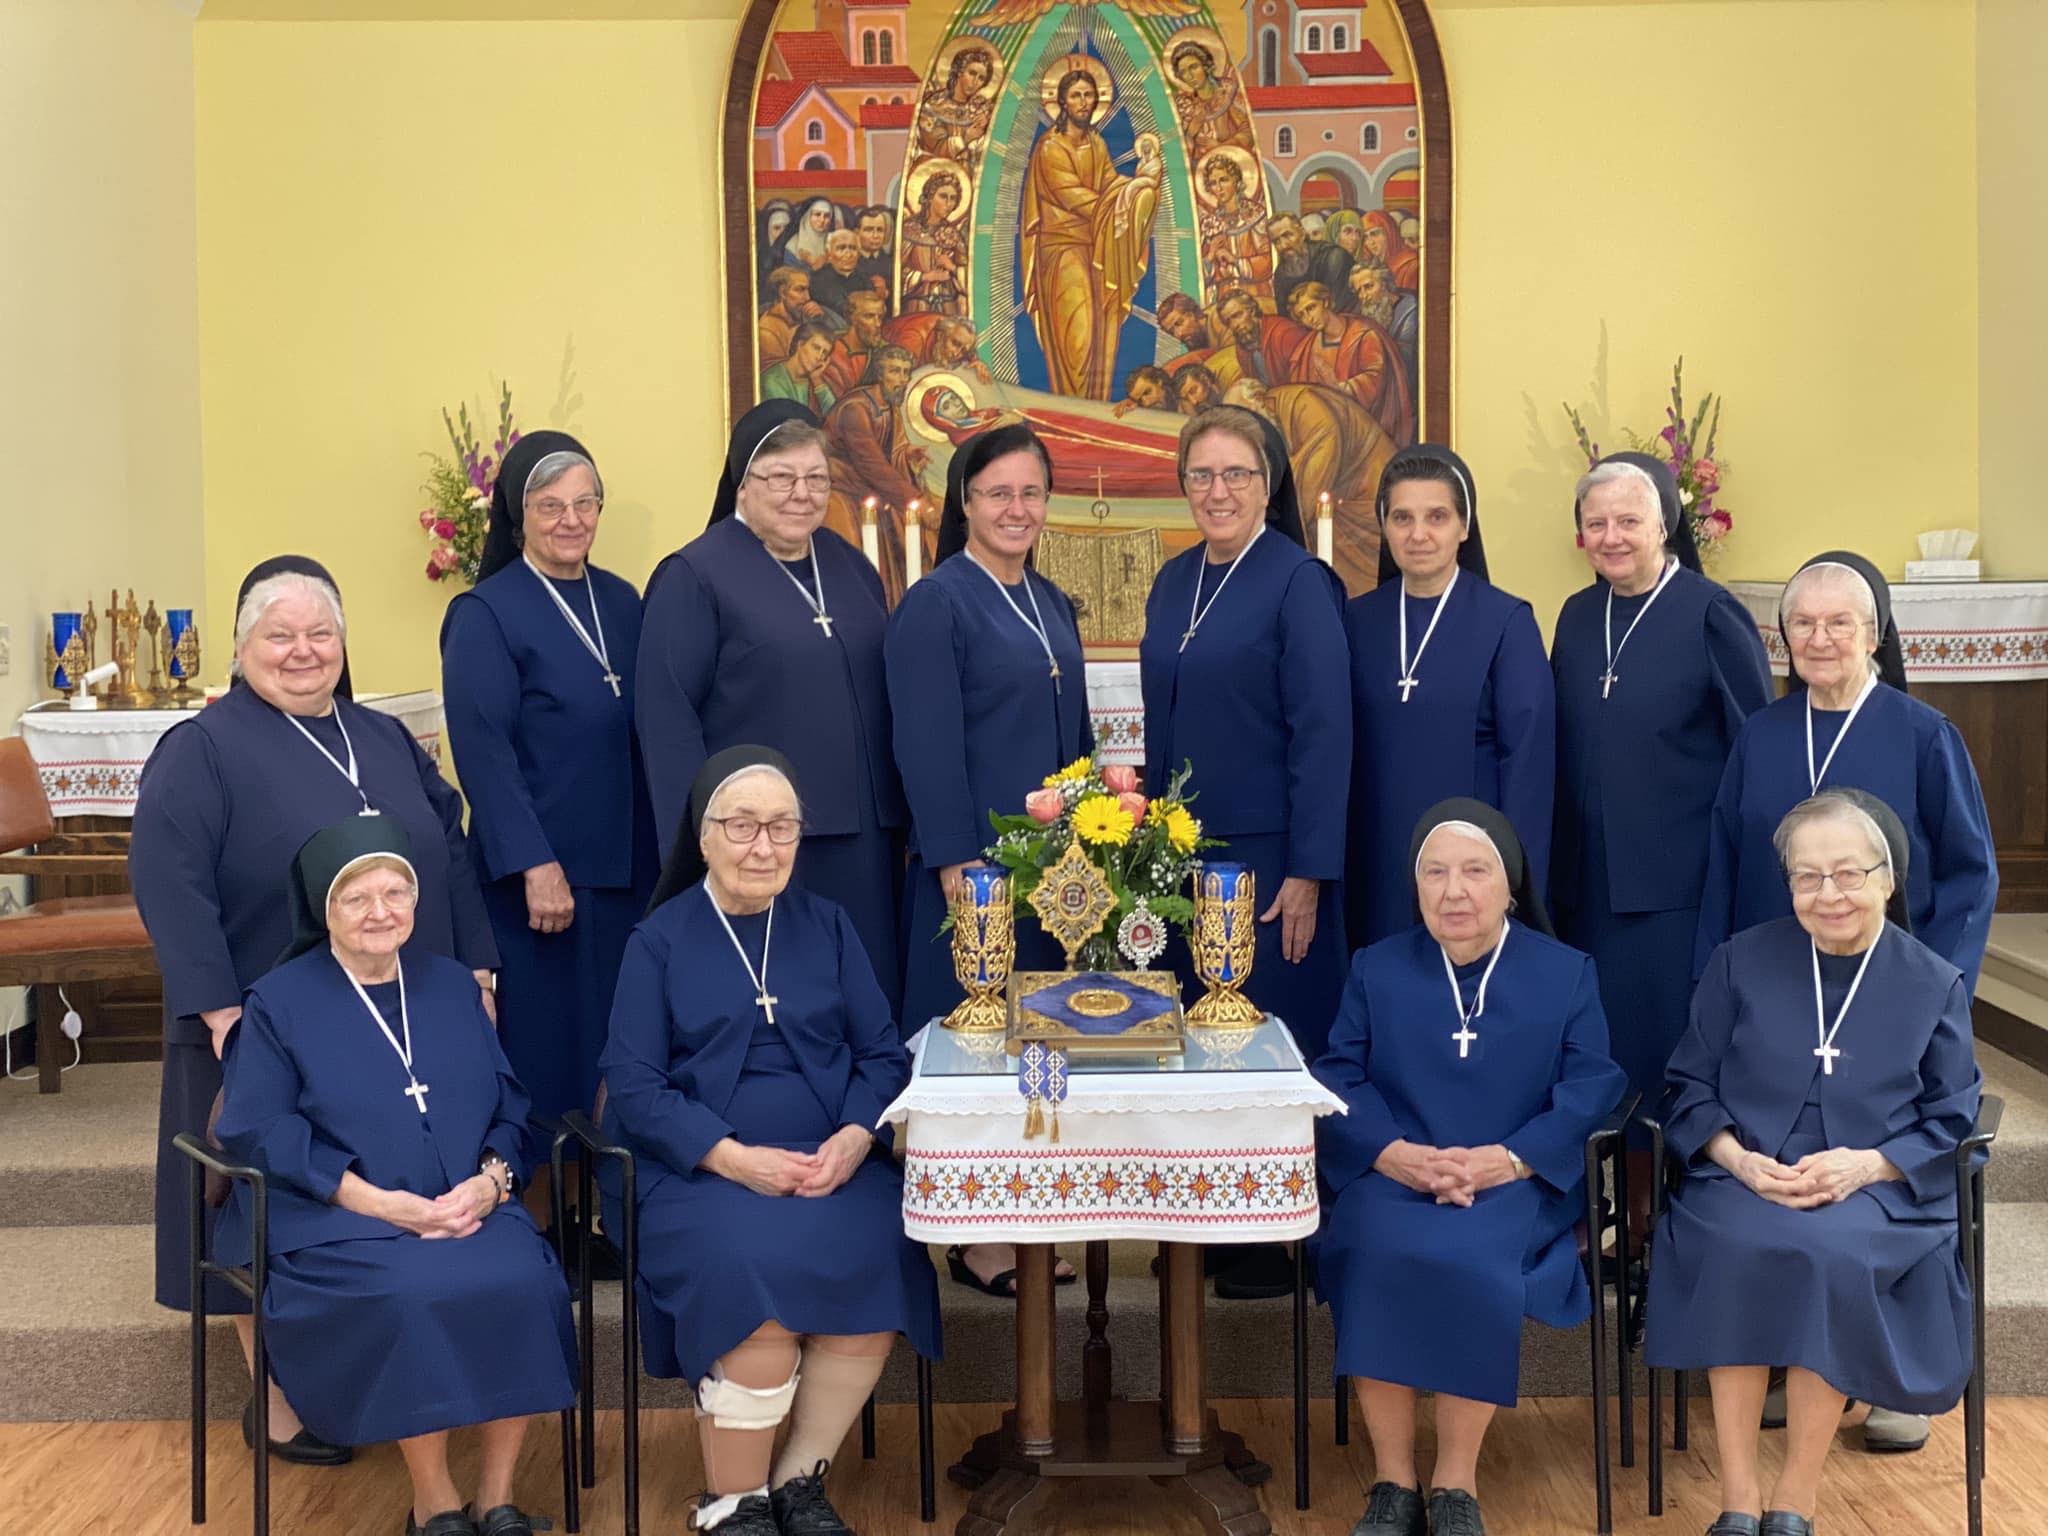 The Sisters Servants of Mary Immaculate